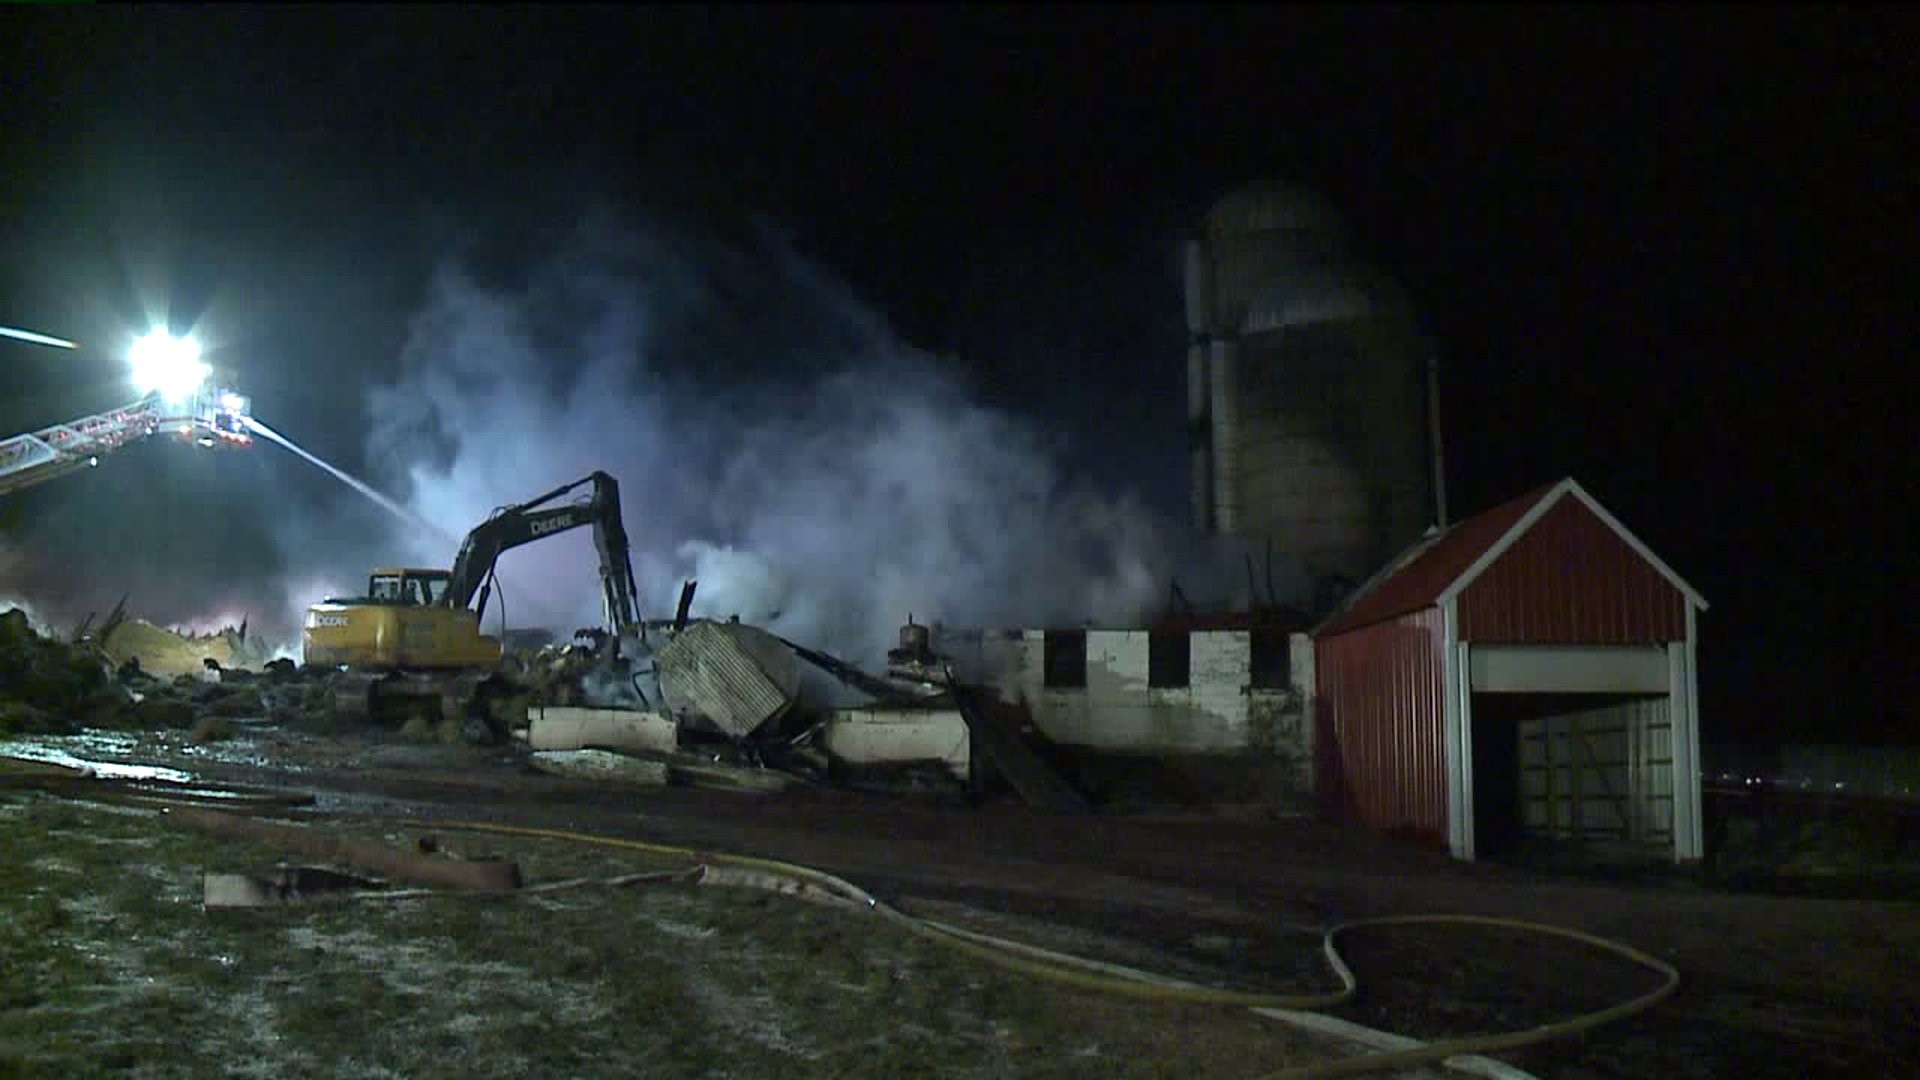 Cows Killed in Barn Fire